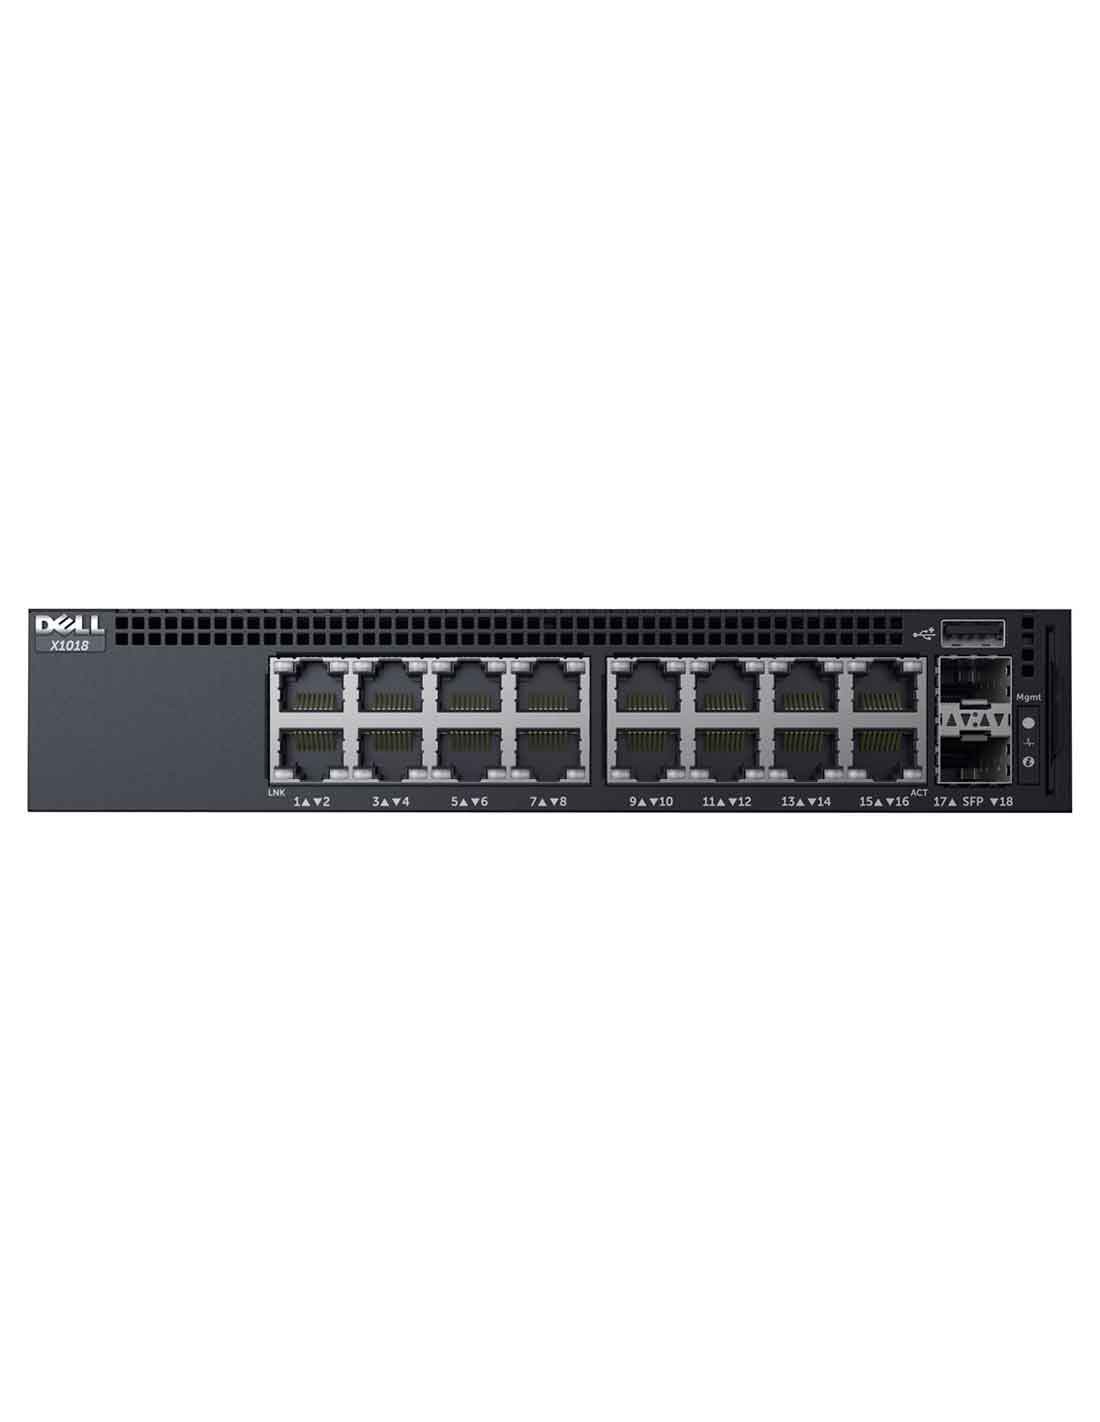 Dell Networking X1018P Managed Switch at a cheap price and fast free delivery in Dubai UAE